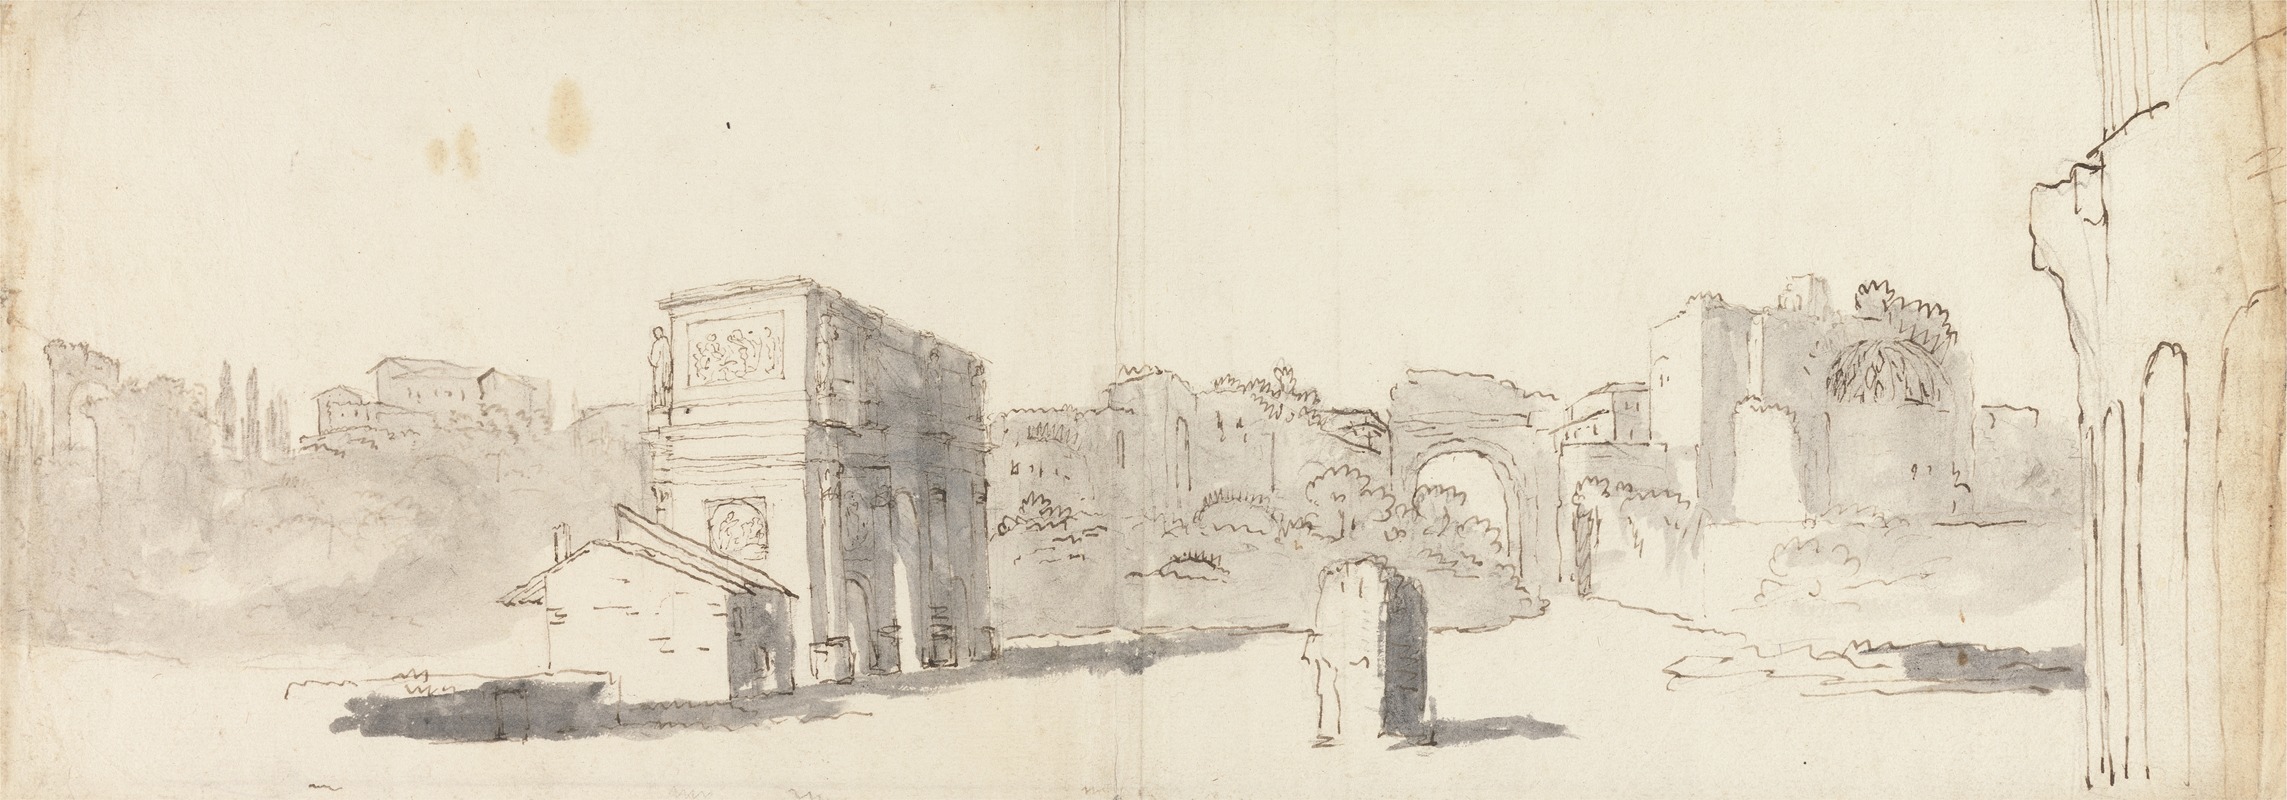 James Barry - Rome, A View of the Arch of Constantine with Other Ruins